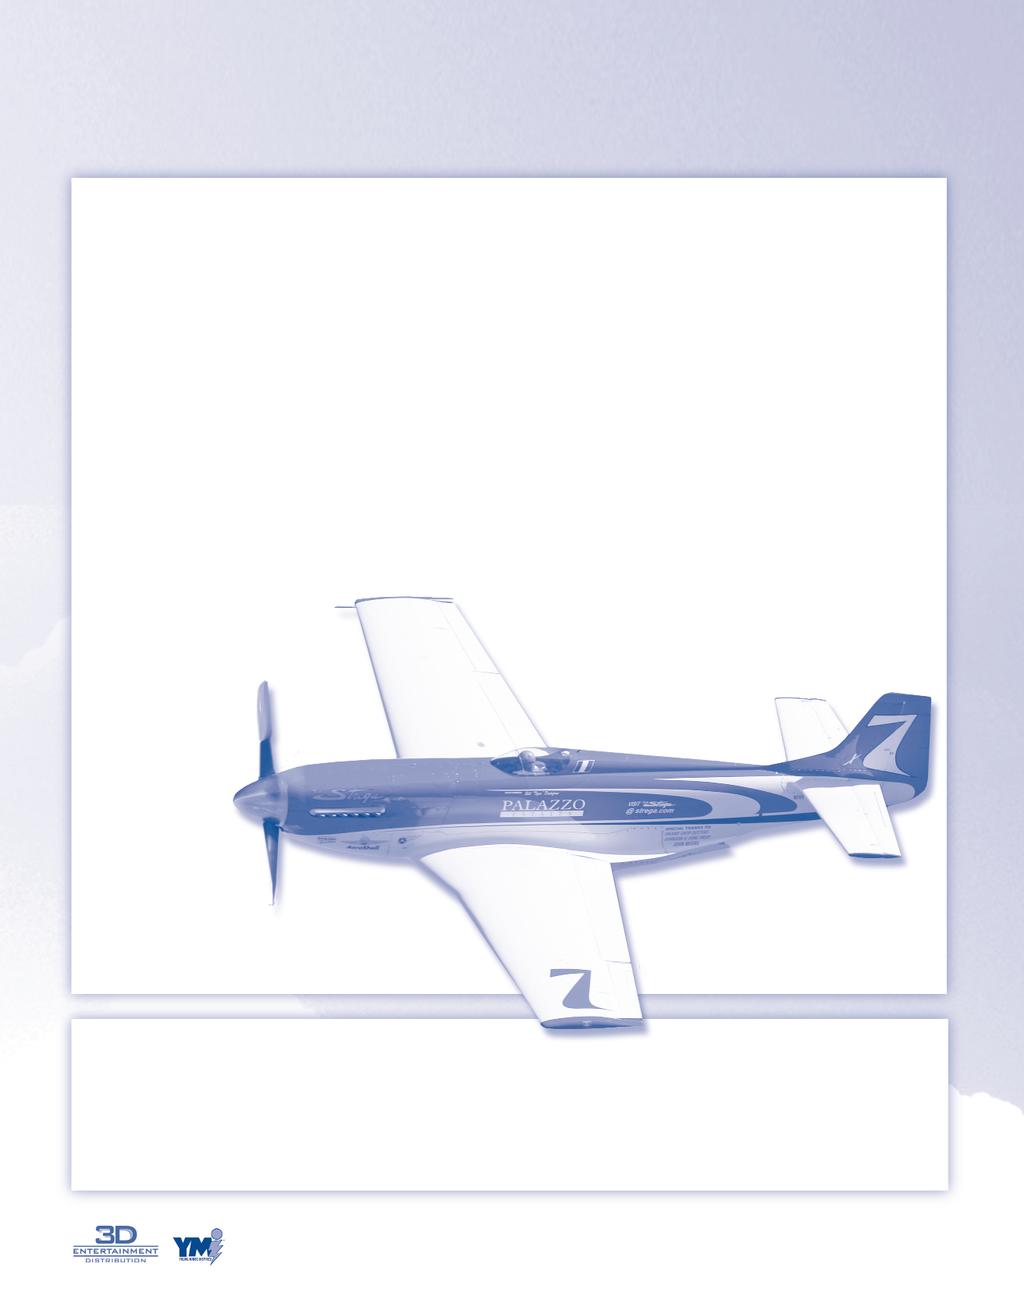 REPRODUCIBLE MASTER GRADES 6-9 (AGES 11-14) ACTIVITY 3 THE HUMAN COMPONENT In Air Racers, you meet Steve Hinton, who inherited his passion for World War II military aircraft from his father.